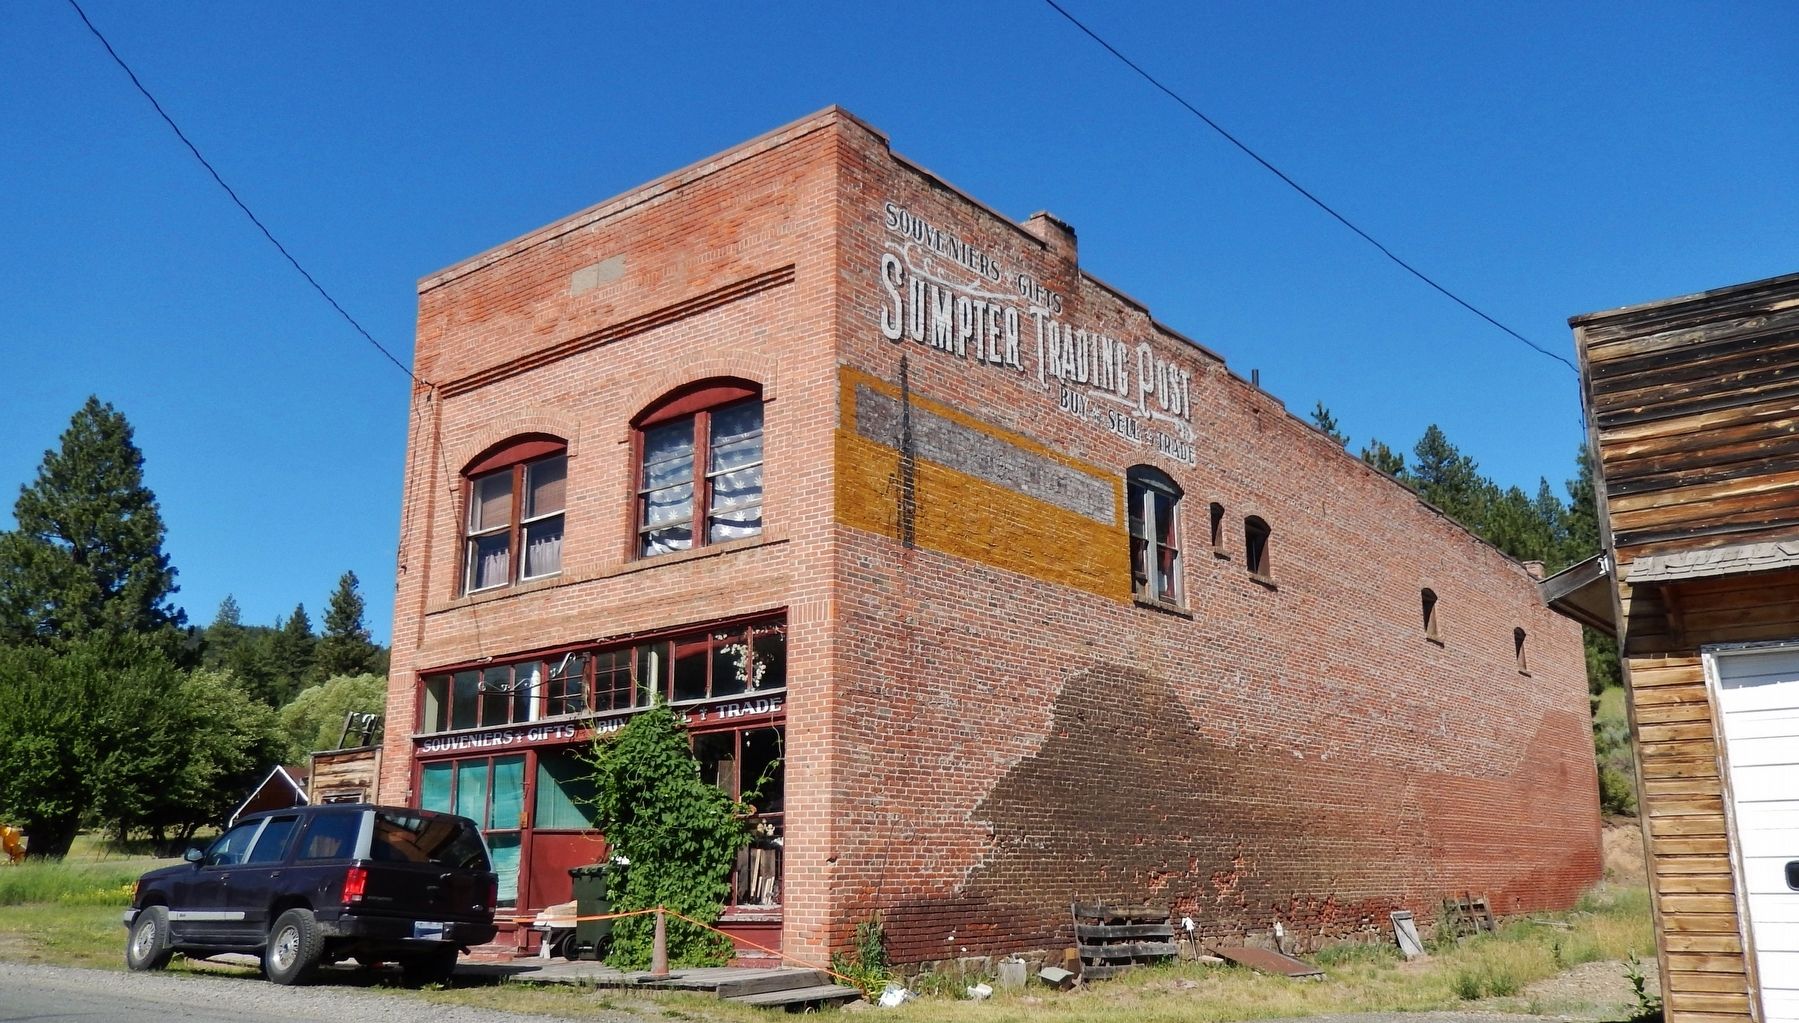 Sumpter Trading Post image. Click for full size.